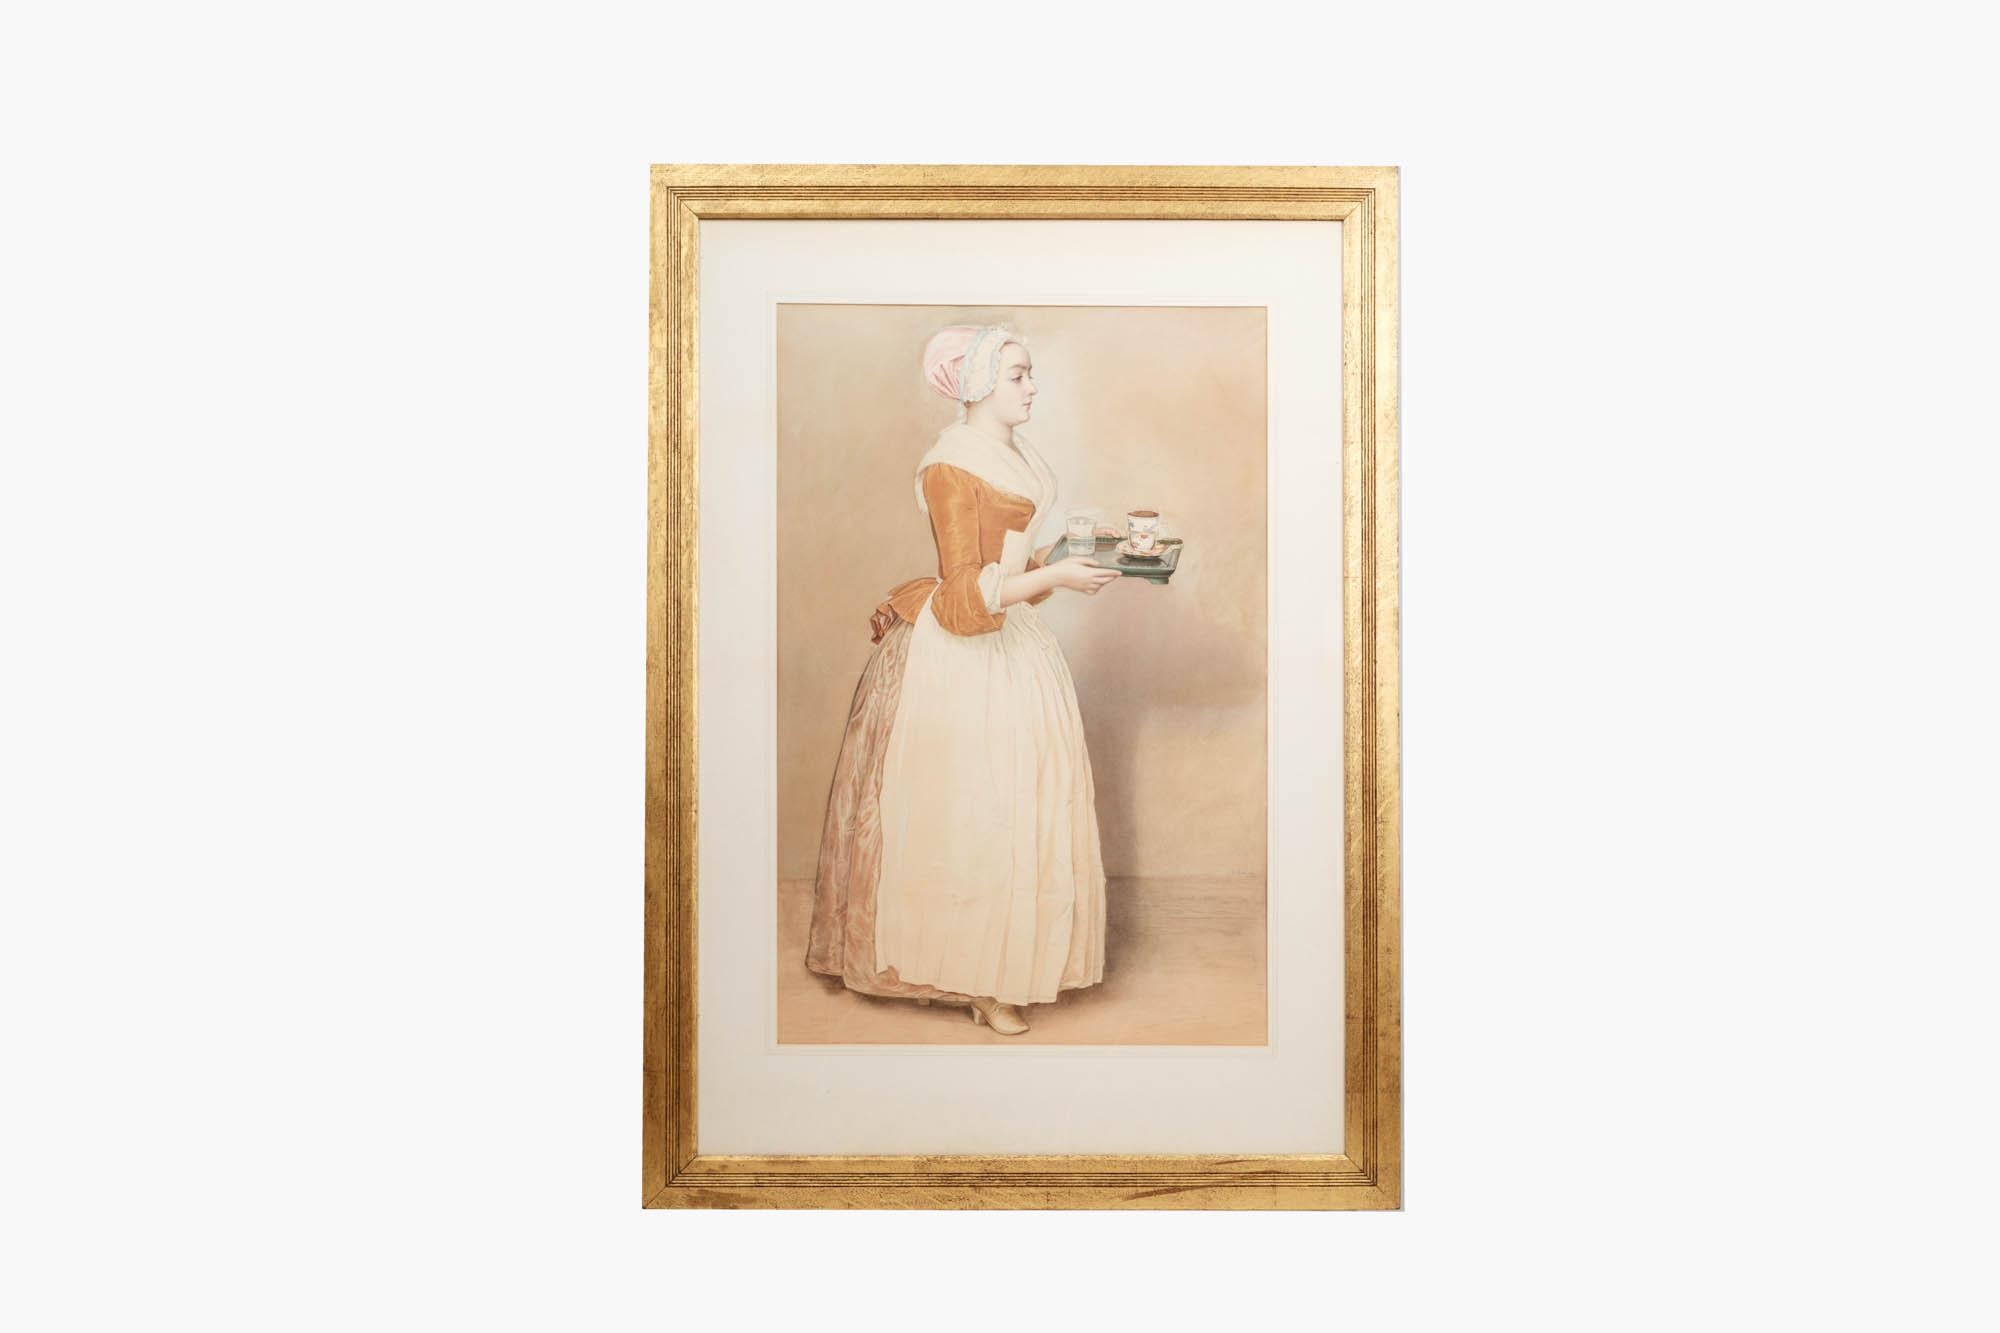 ‘The Chocolate Girl’ Watercolour by August Von Schiegel (German, 1828-1895), after a pastel work by Jean Etienne Liotards.

It shows a young German chambermaid in profile, carrying a tray with a glass of water and a cup of chocolate. The picture